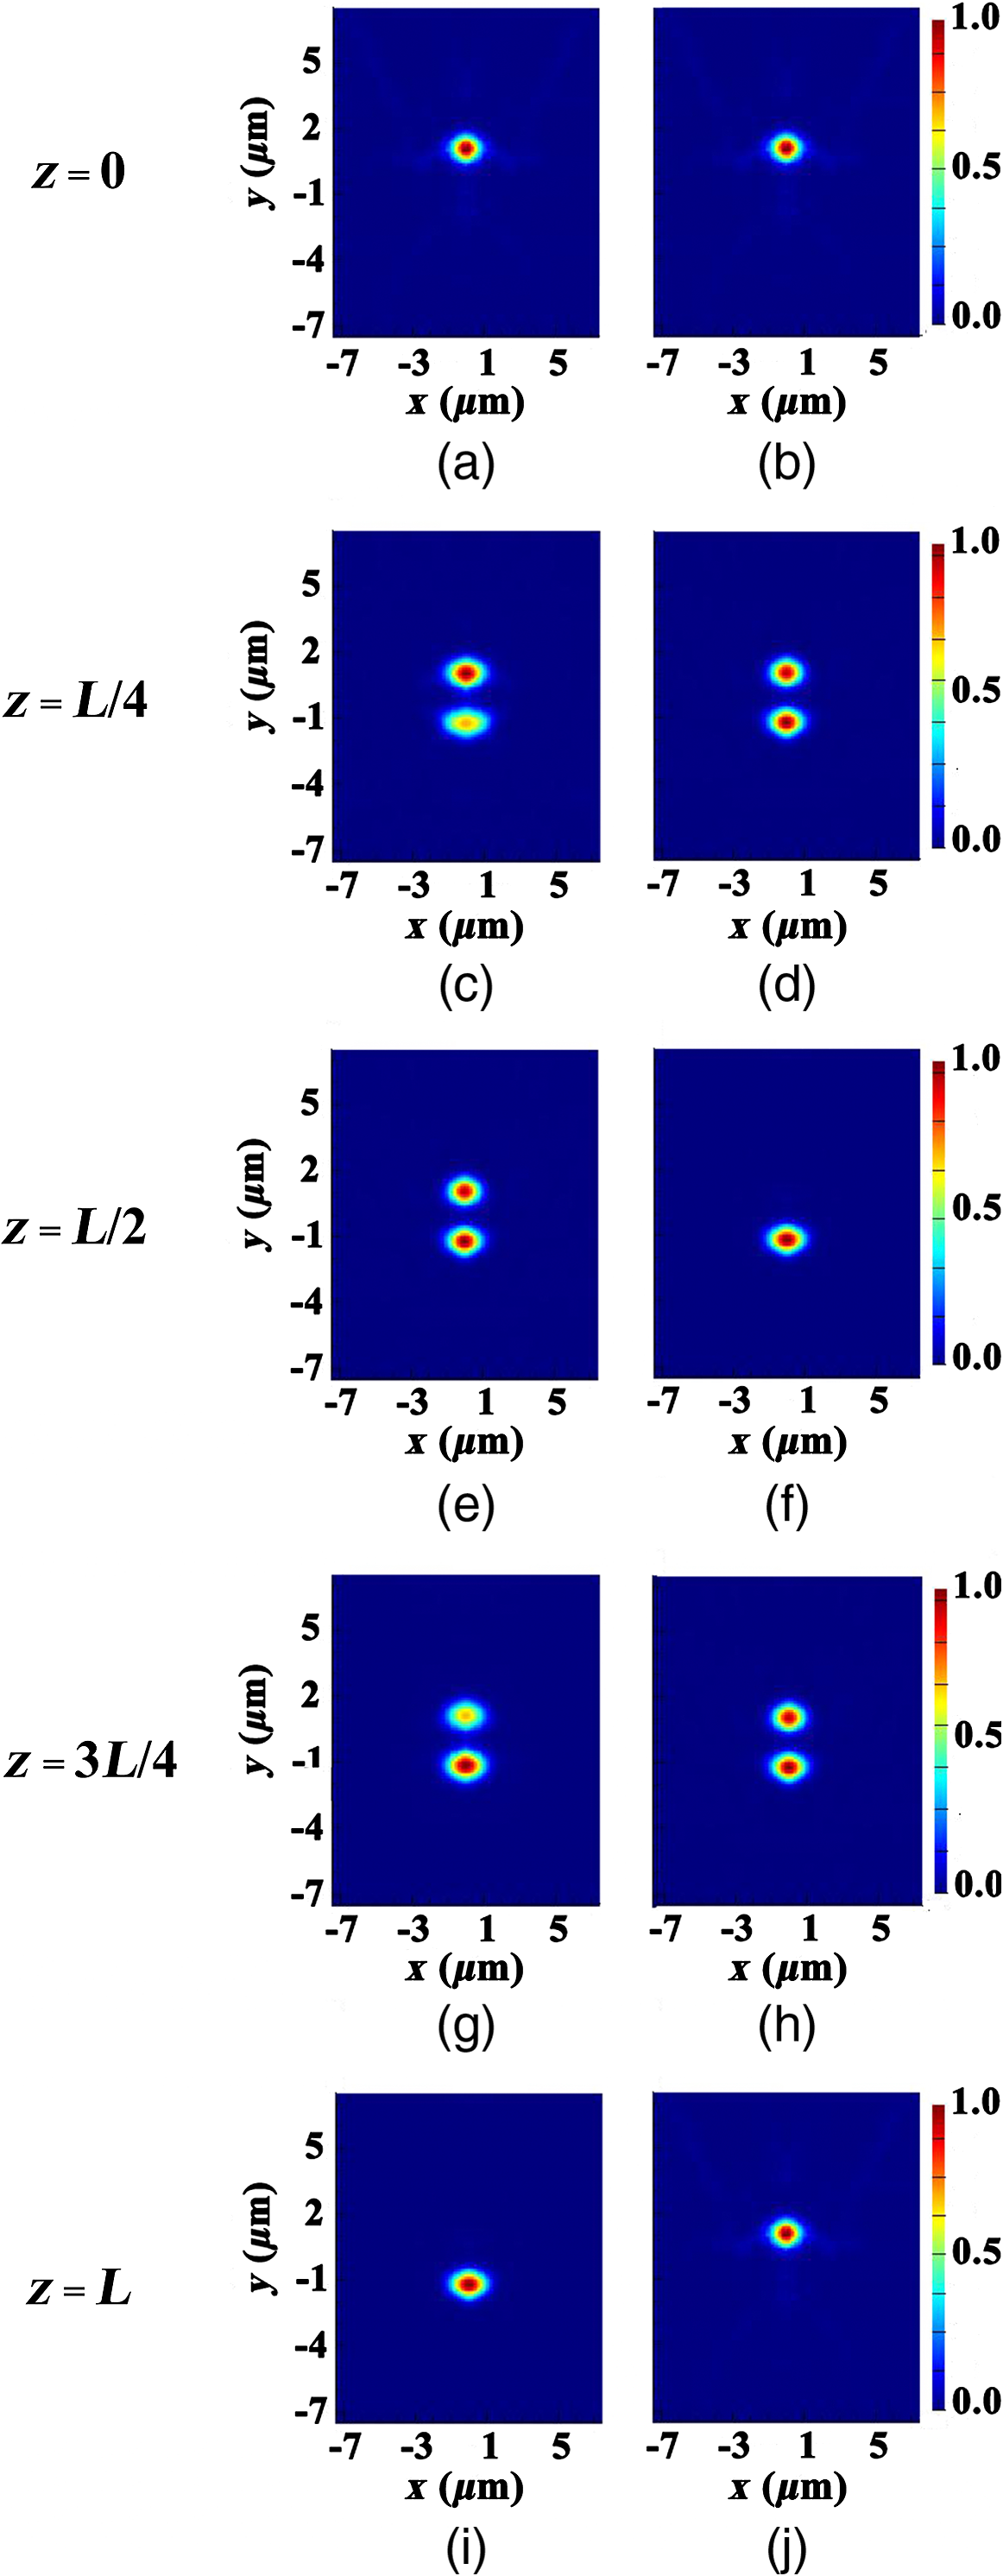 Design Of Polarization Beam Splitter Based On Dual Core Photonic Crystal Fiber With Three Layers Of Elliptical Air Holes